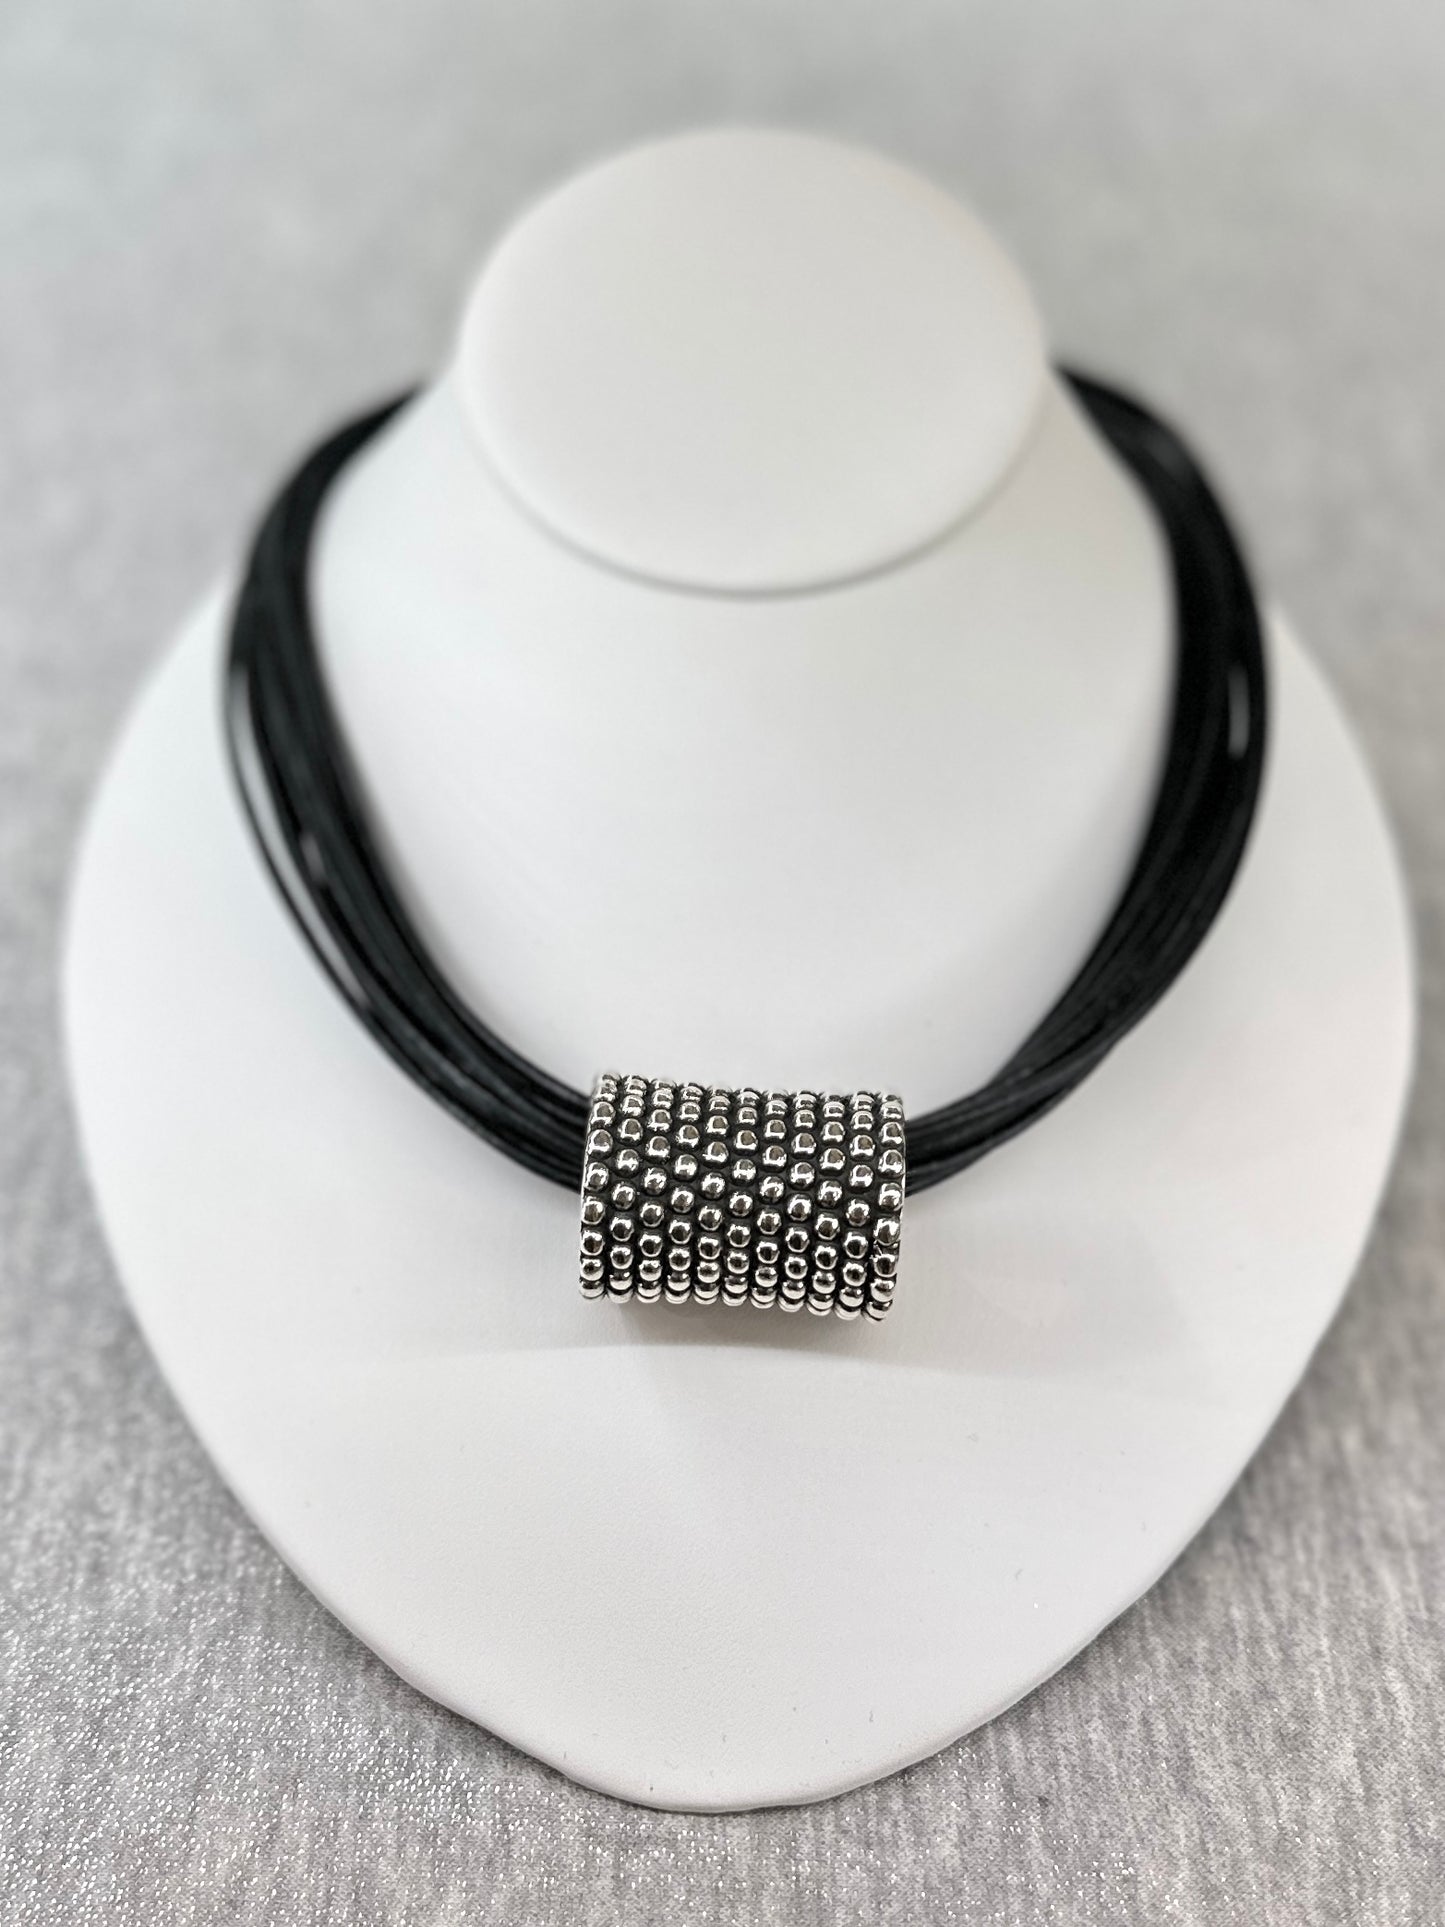 Simon Sebbag Designs- Black Leather with Sterling Silver Bead